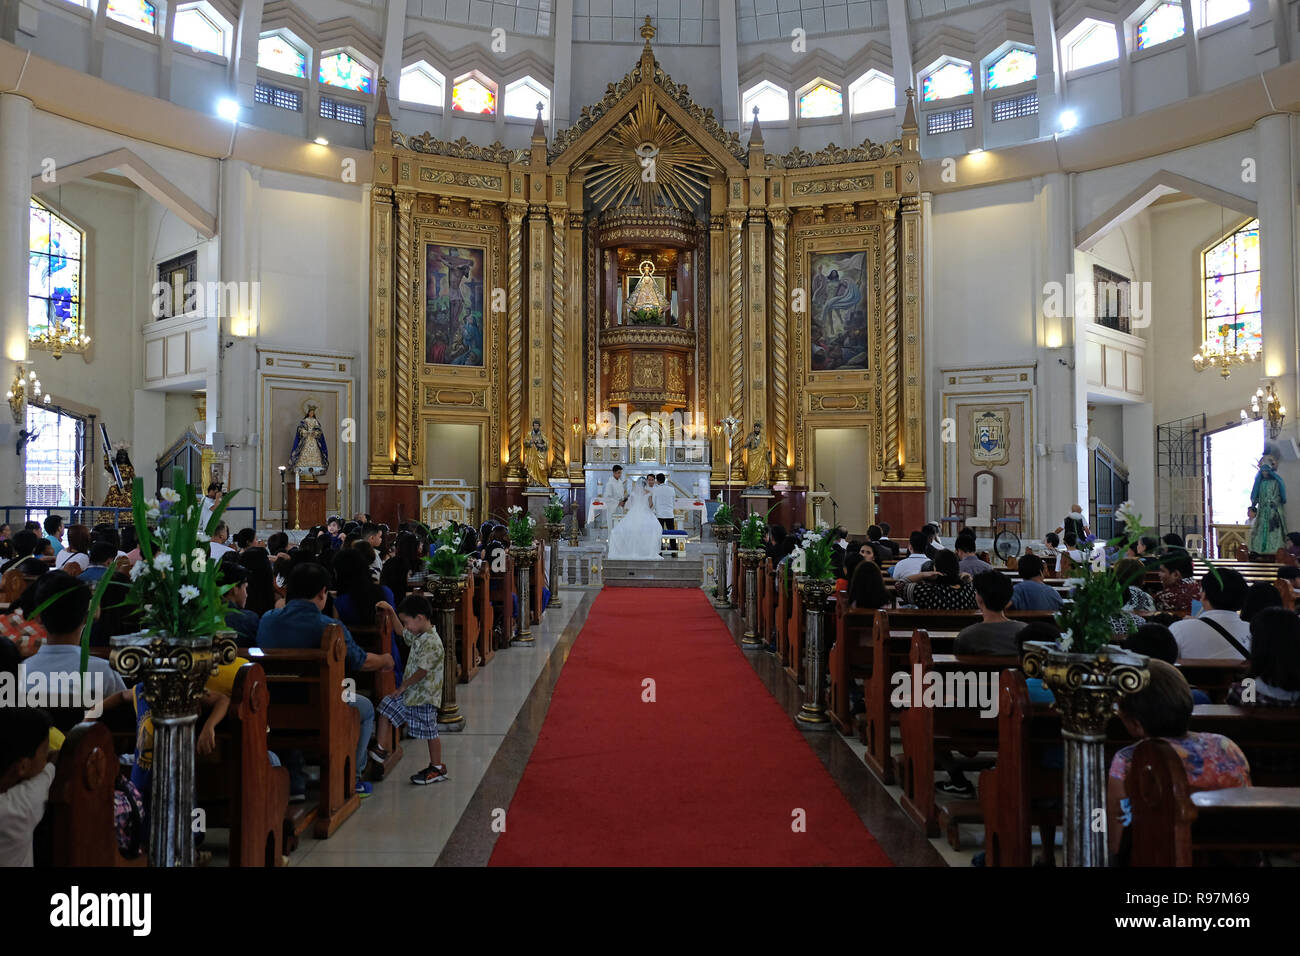 Wedding ceremony inside the Roman Catholic Antipolo Cathedral or National Shrine of Our Lady of Peace and Good Voyage located in the city of Antipolo, in the province of Rizal in the Philippines. Stock Photo